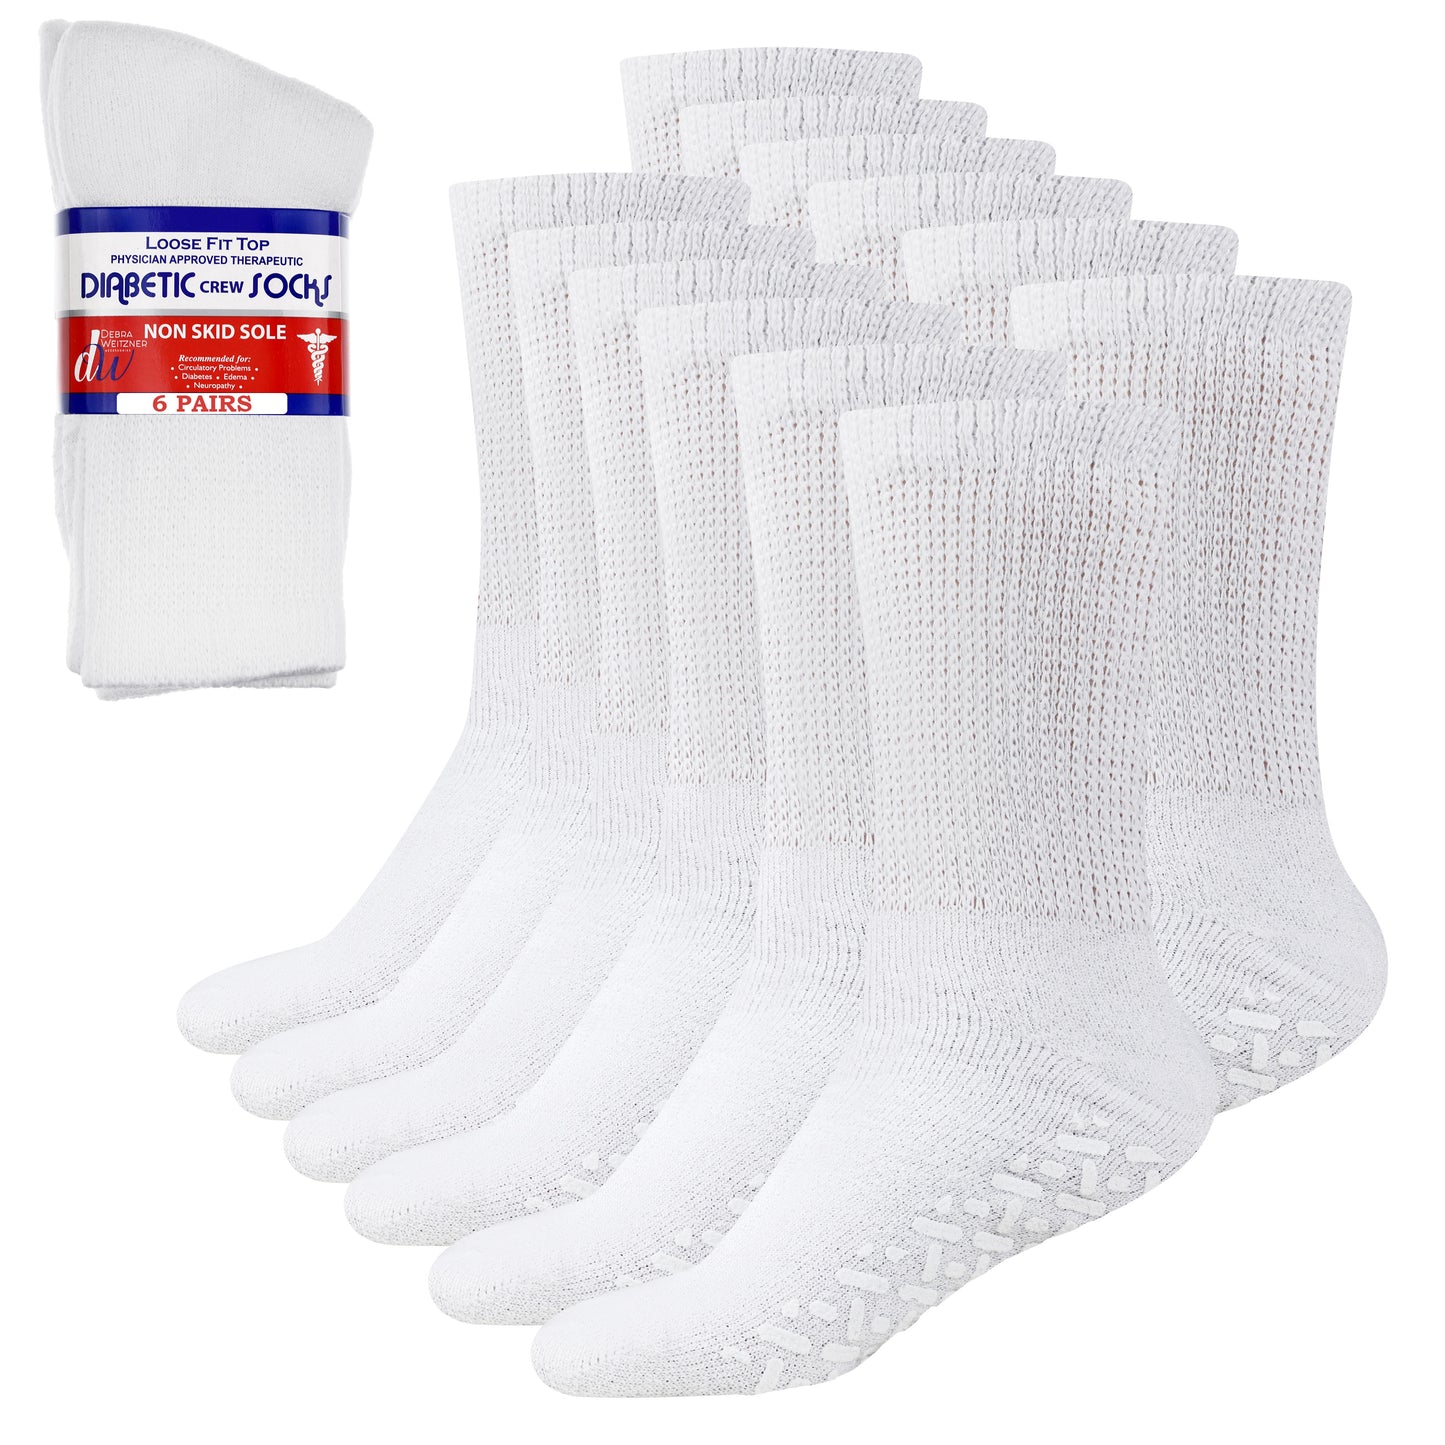 Diabetic Crew Socks with Grips- Non Slip for Men and Women - 6 Pairs